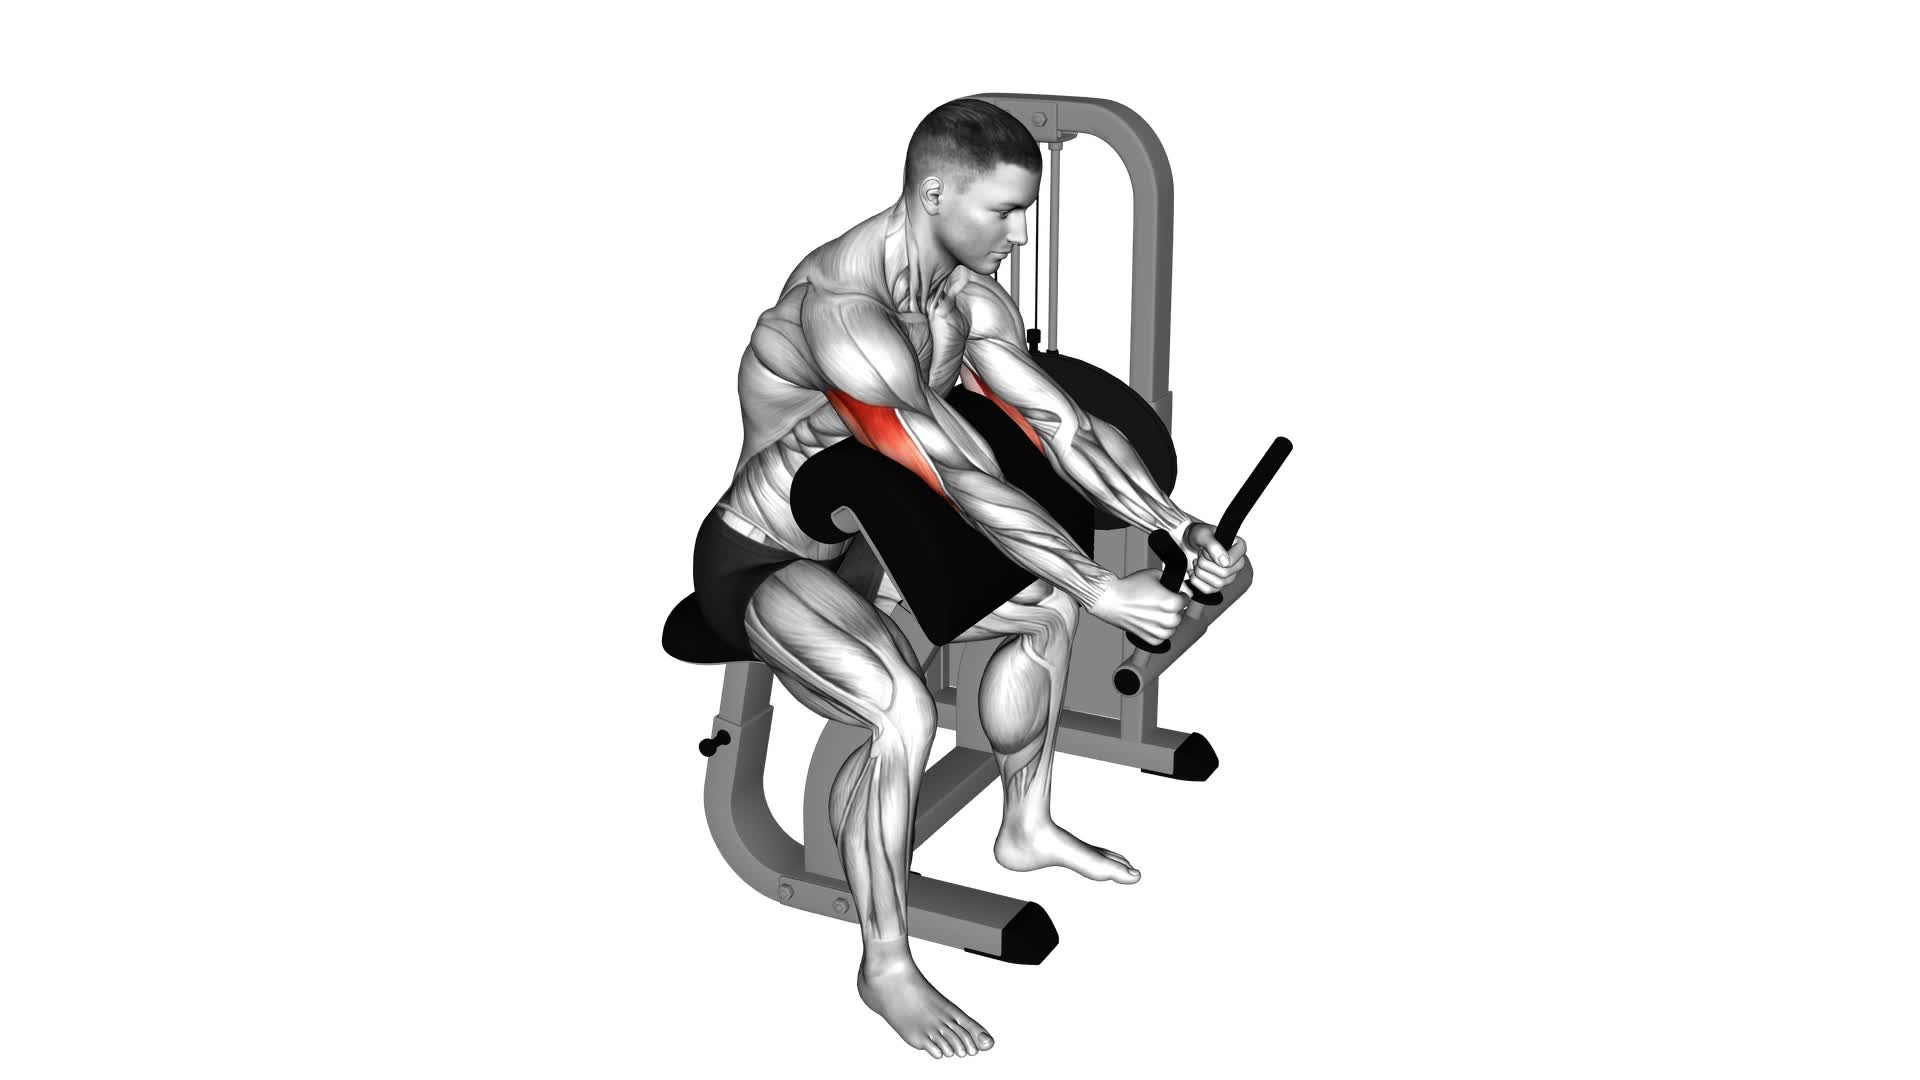 Lever Triceps Extension (VERSION 2) - Video Exercise Guide & Tips